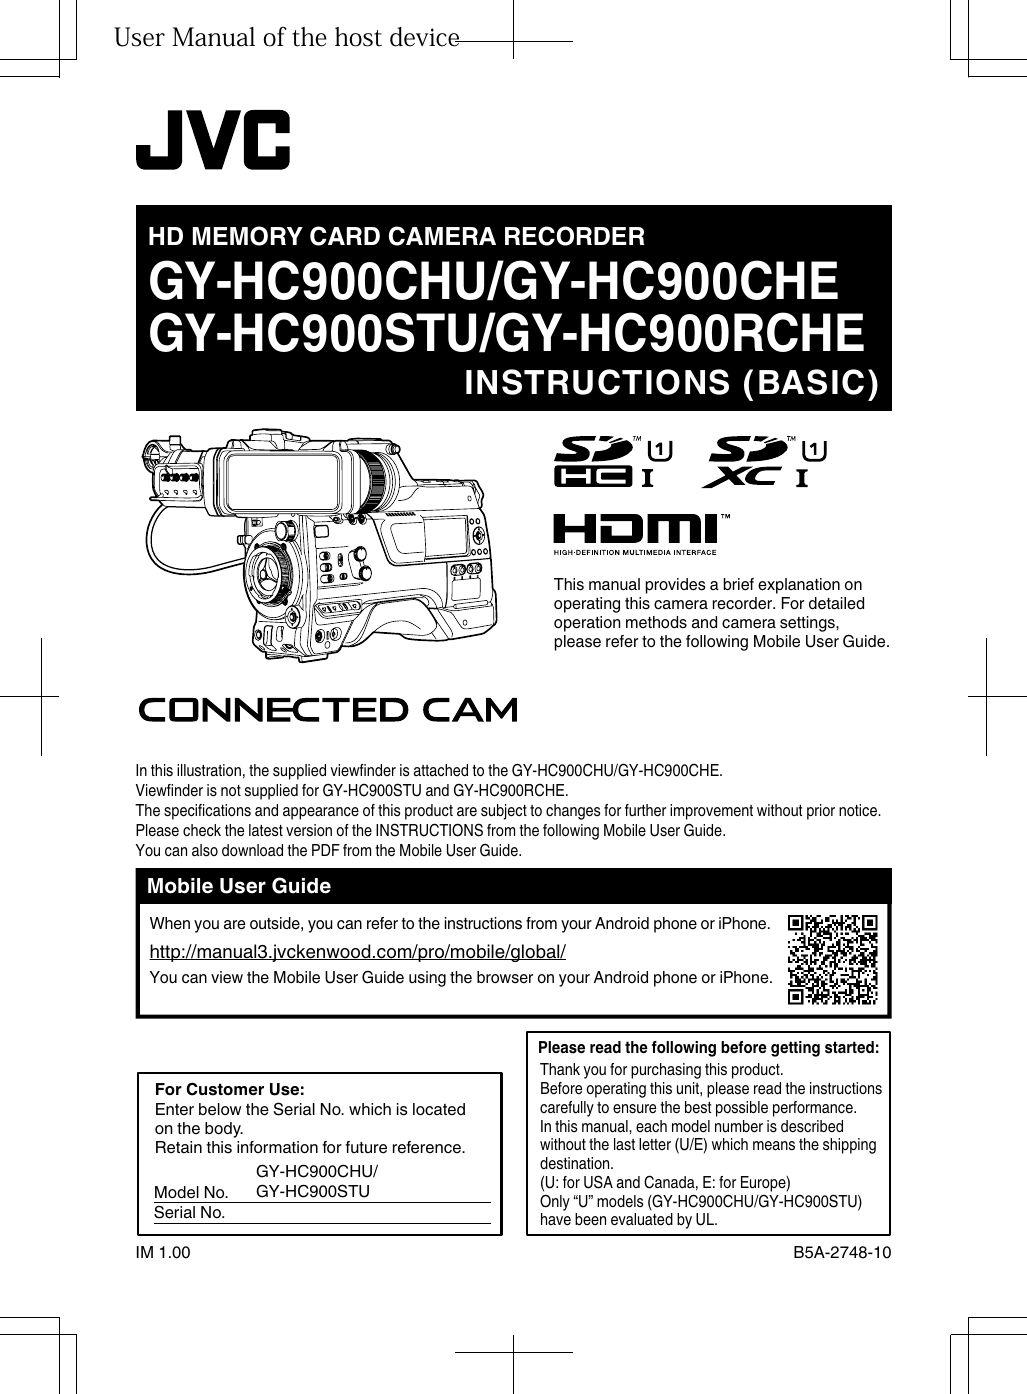 .GY-HC900CHU/GY-HC900CHEGY-HC900STU/GY-HC900RCHEIM 1.00 B5A-2748-10HD MEMORY CARD CAMERA RECORDERINSTRUCTIONS (BASIC)In this illustration, the supplied viewfinder is attached to the GY-HC900CHU/GY-HC900CHE.Viewfinder is not supplied for GY-HC900STU and GY-HC900RCHE.The specifications and appearance of this product are subject to changes for further improvement without prior notice.Please check the latest version of the INSTRUCTIONS from the following Mobile User Guide. You can also download the PDF from the Mobile User Guide.This manual provides a brief explanation on operating this camera recorder. For detailed operation methods and camera settings, please refer to the following Mobile User Guide.Mobile User GuideWhen you are outside, you can refer to the instructions from your Android phone or iPhone.http://manual3.jvckenwood.com/pro/mobile/global/You can view the Mobile User Guide using the browser on your Android phone or iPhone.Thank you for purchasing this product.Before operating this unit, please read the instructions carefully to ensure the best possible performance.In this manual, each model number is described without the last letter (U/E) which means the shipping destination.(U: for USA and Canada, E: for Europe)Only “U” models (GY-HC900CHU/GY-HC900STU) have been evaluated by UL.Please read the following before getting started: For Customer Use: Model No. Serial No.Enter below the Serial No. which is located on the body.Retain this information for future reference.GY-HC900CHU/GY-HC900STUUser Manual of the host device